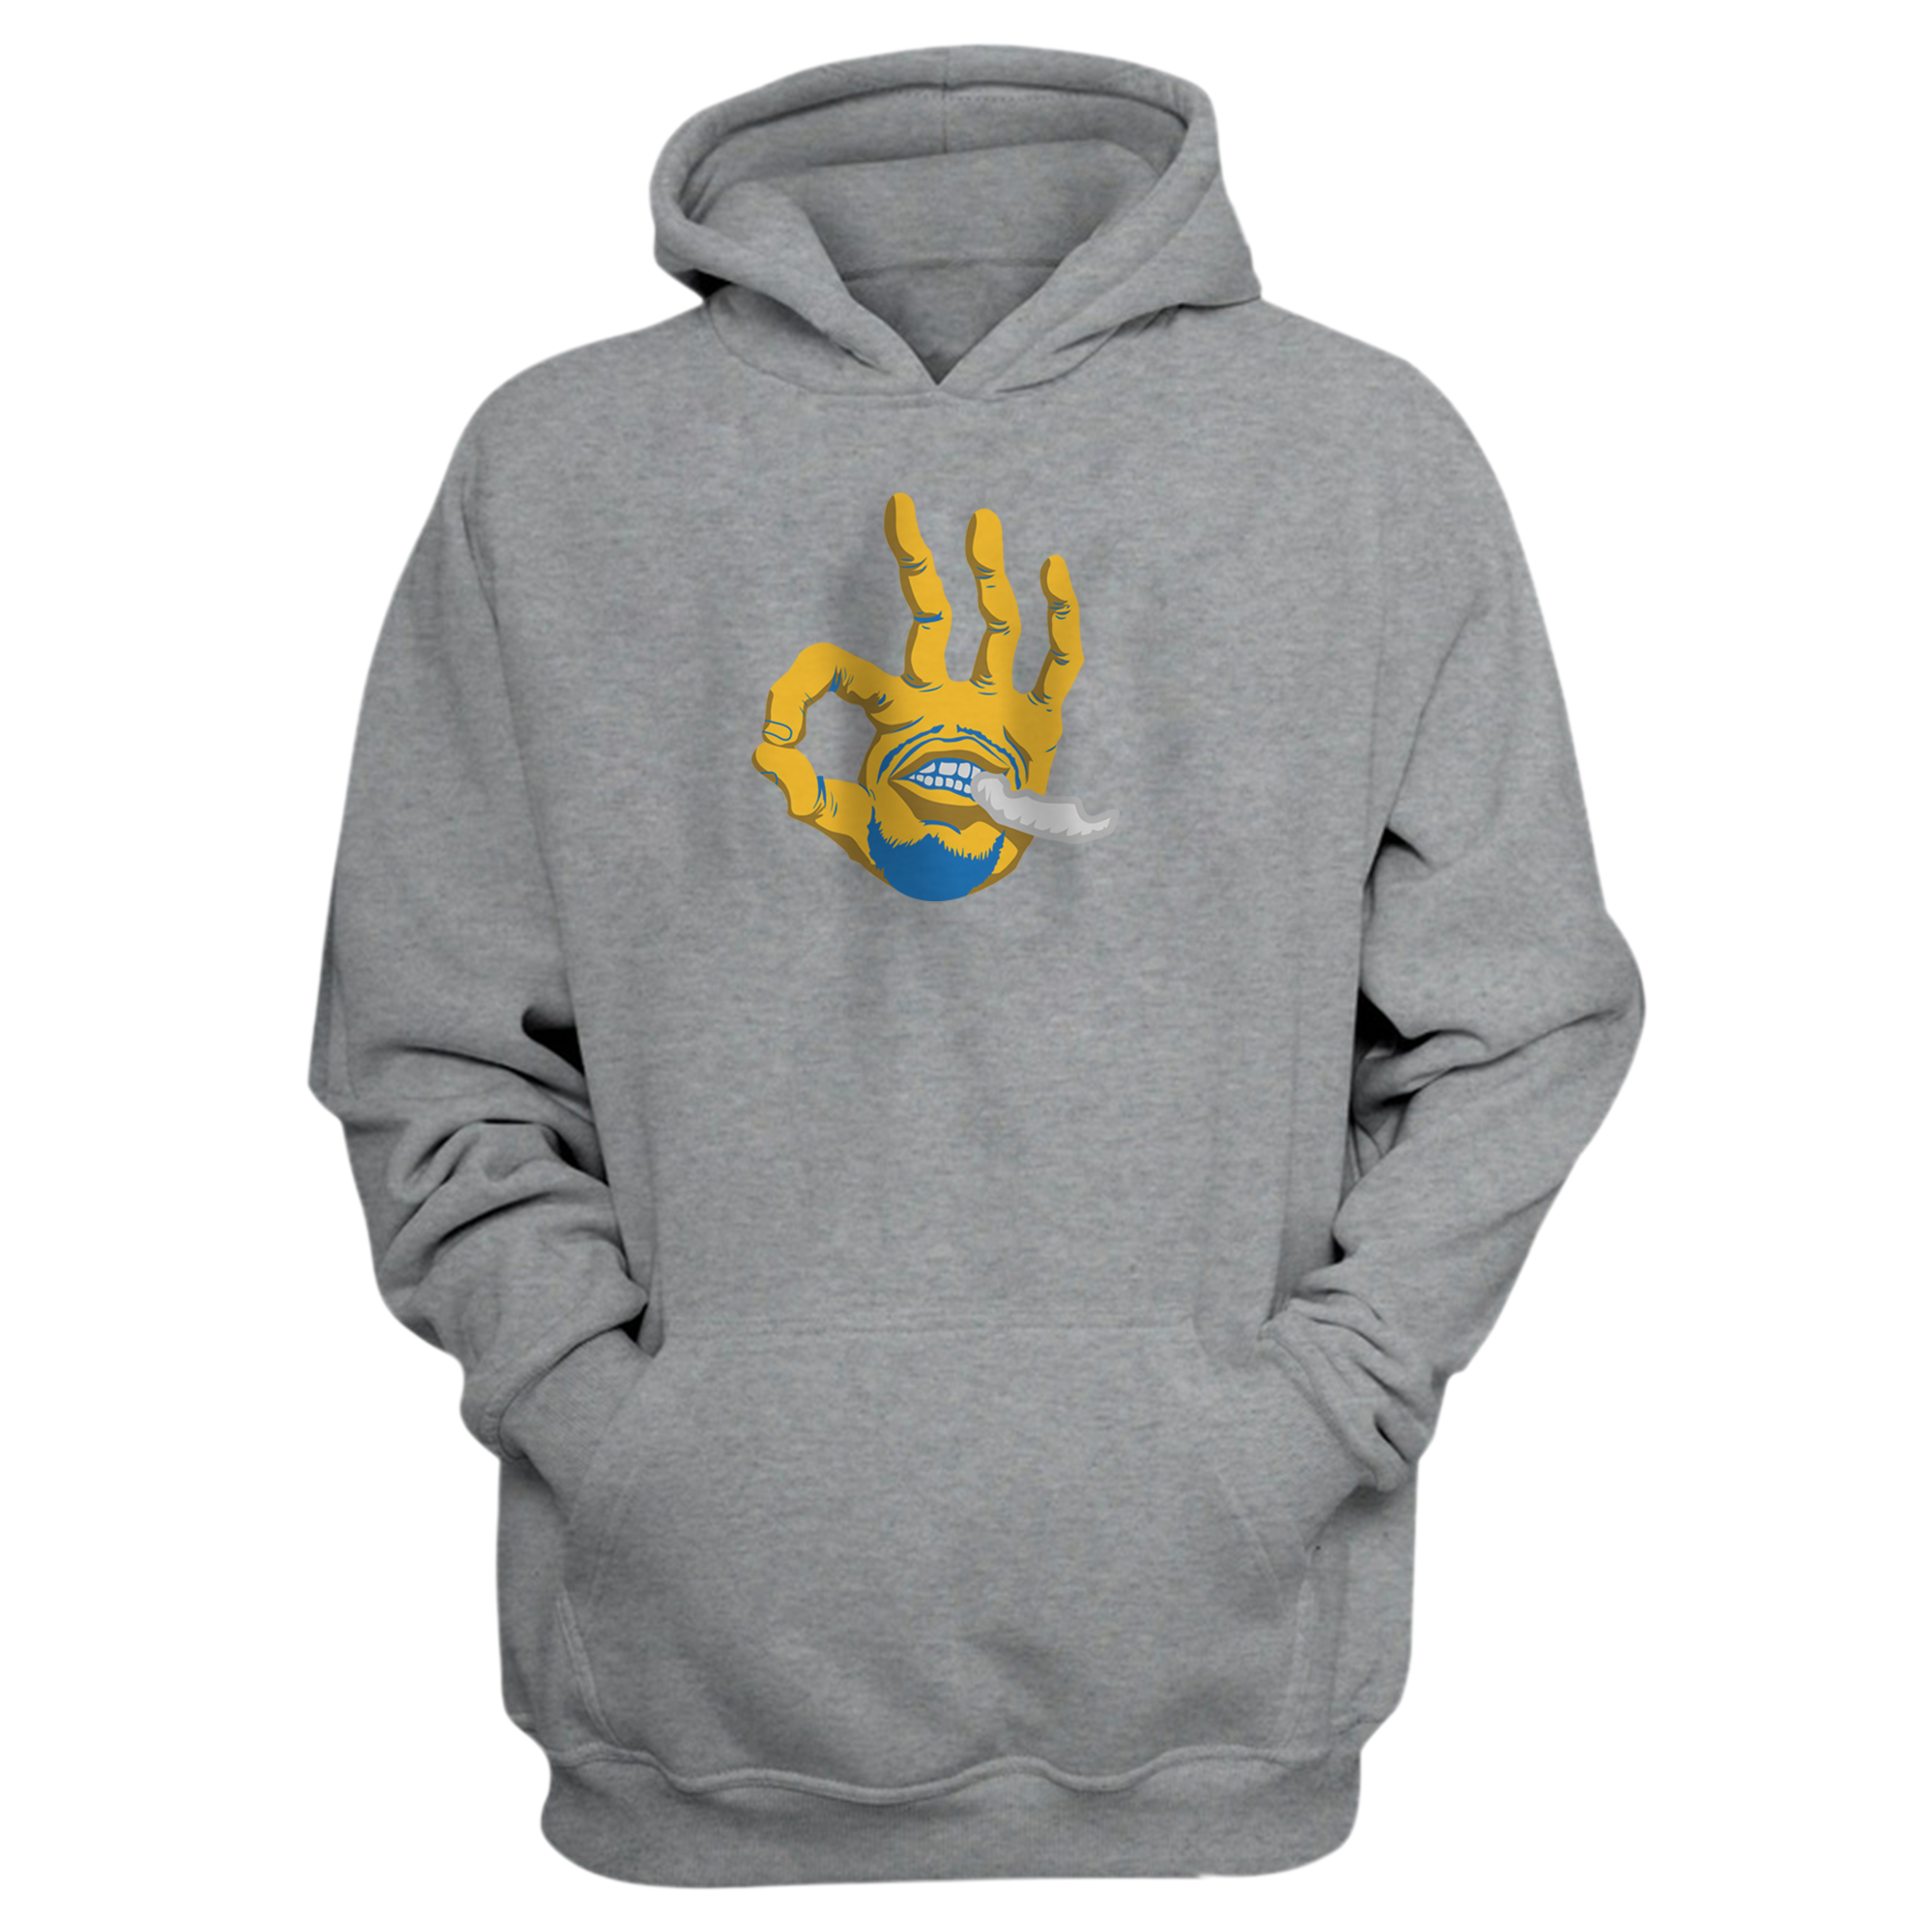 Stephen Curry Hoodie (HD-GRY-830-curry)